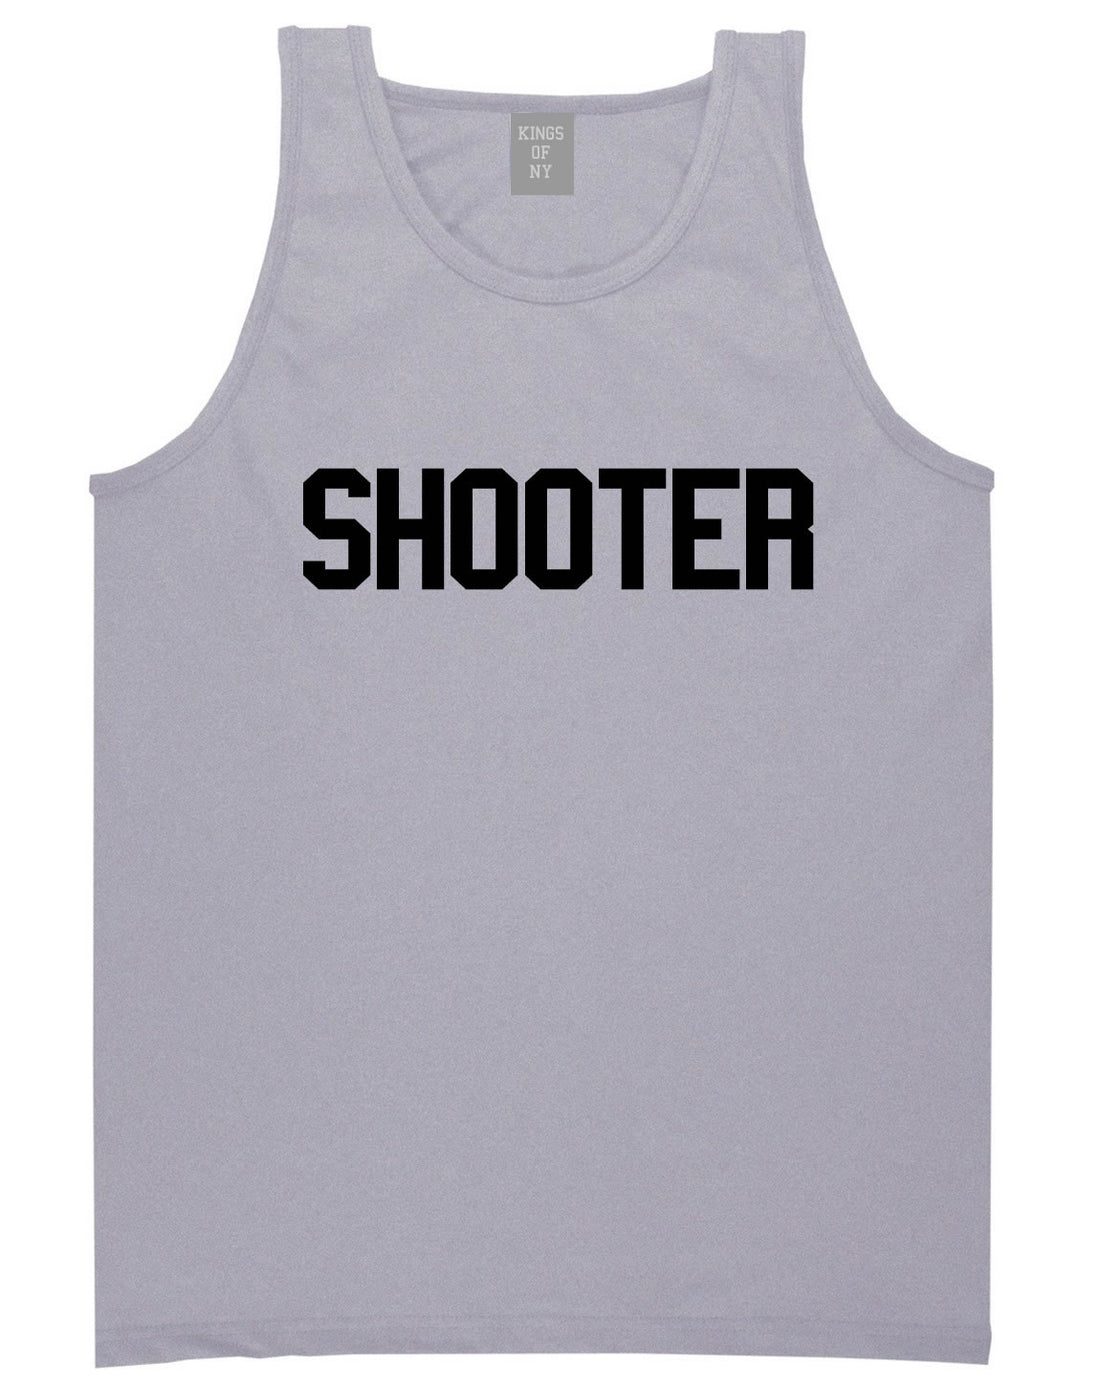 Shooter Tank Top by Kings Of NY